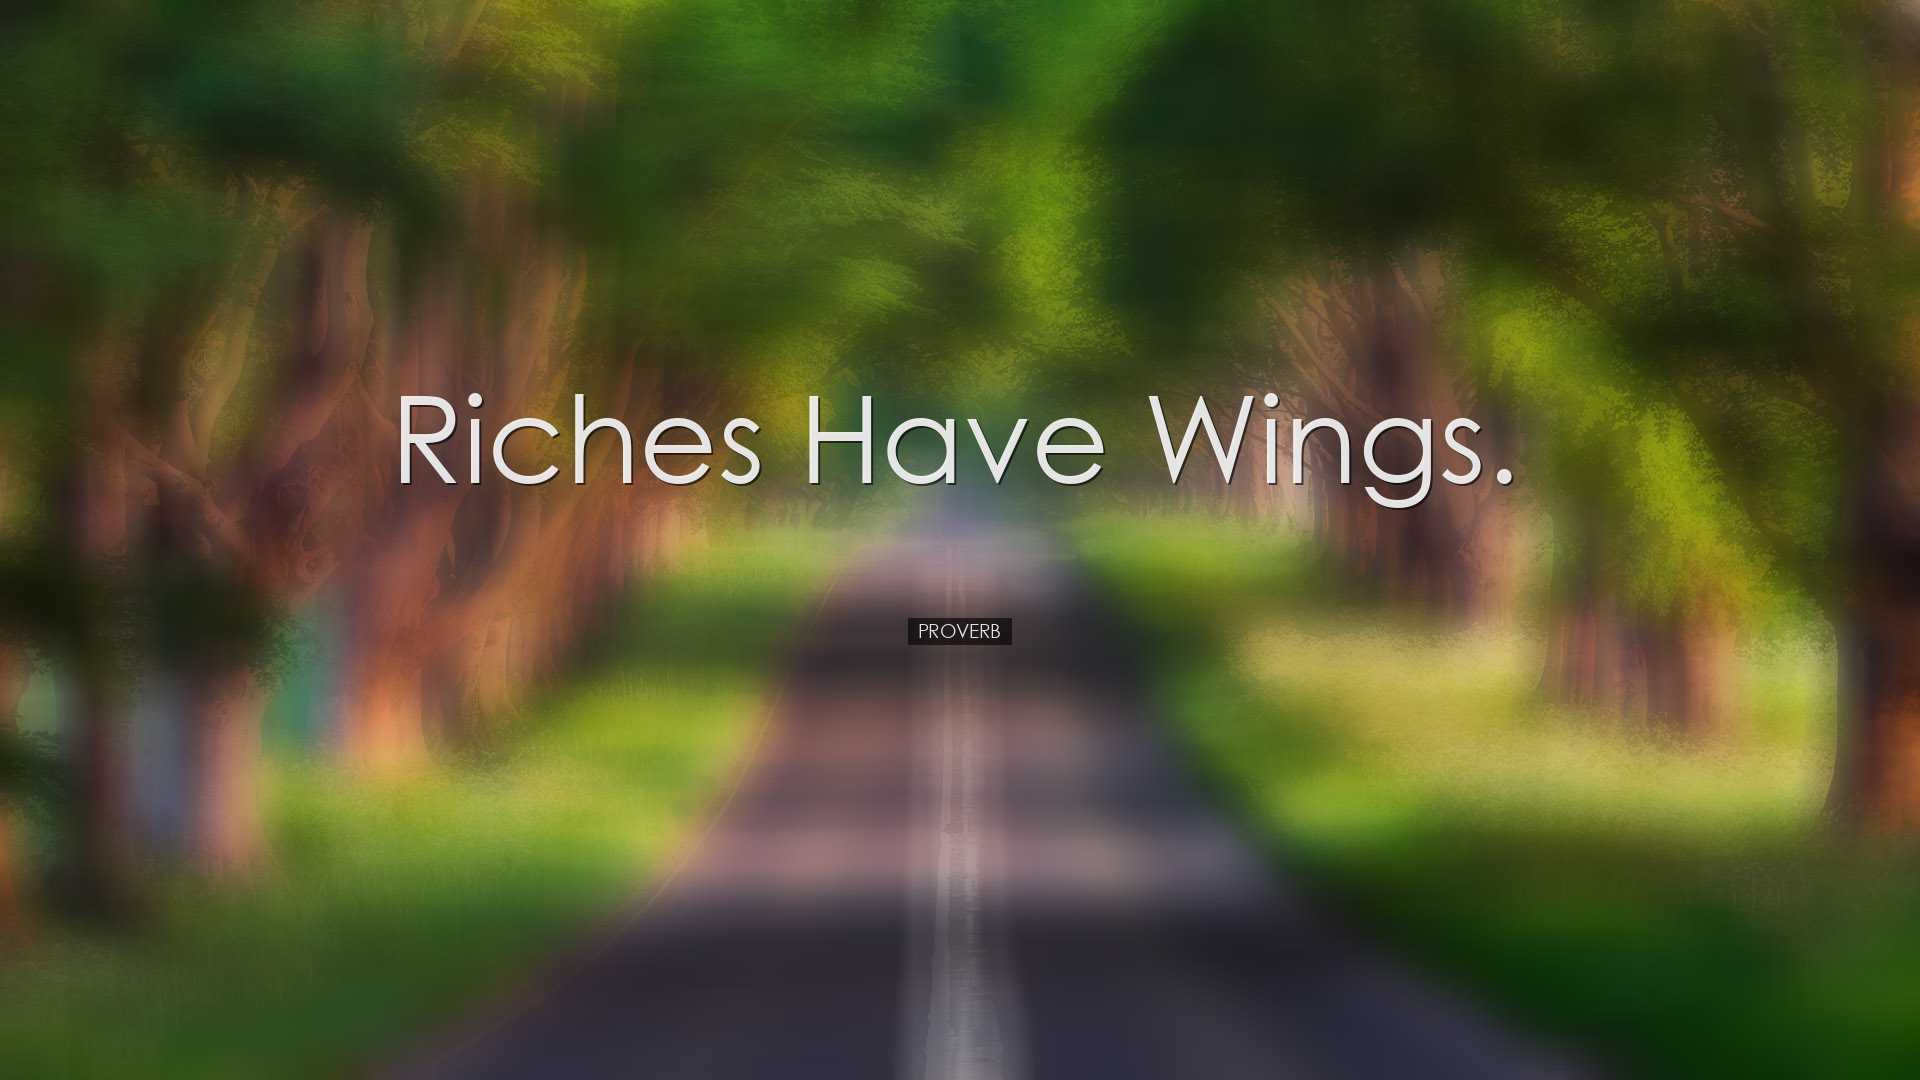 Riches have wings. - Proverb